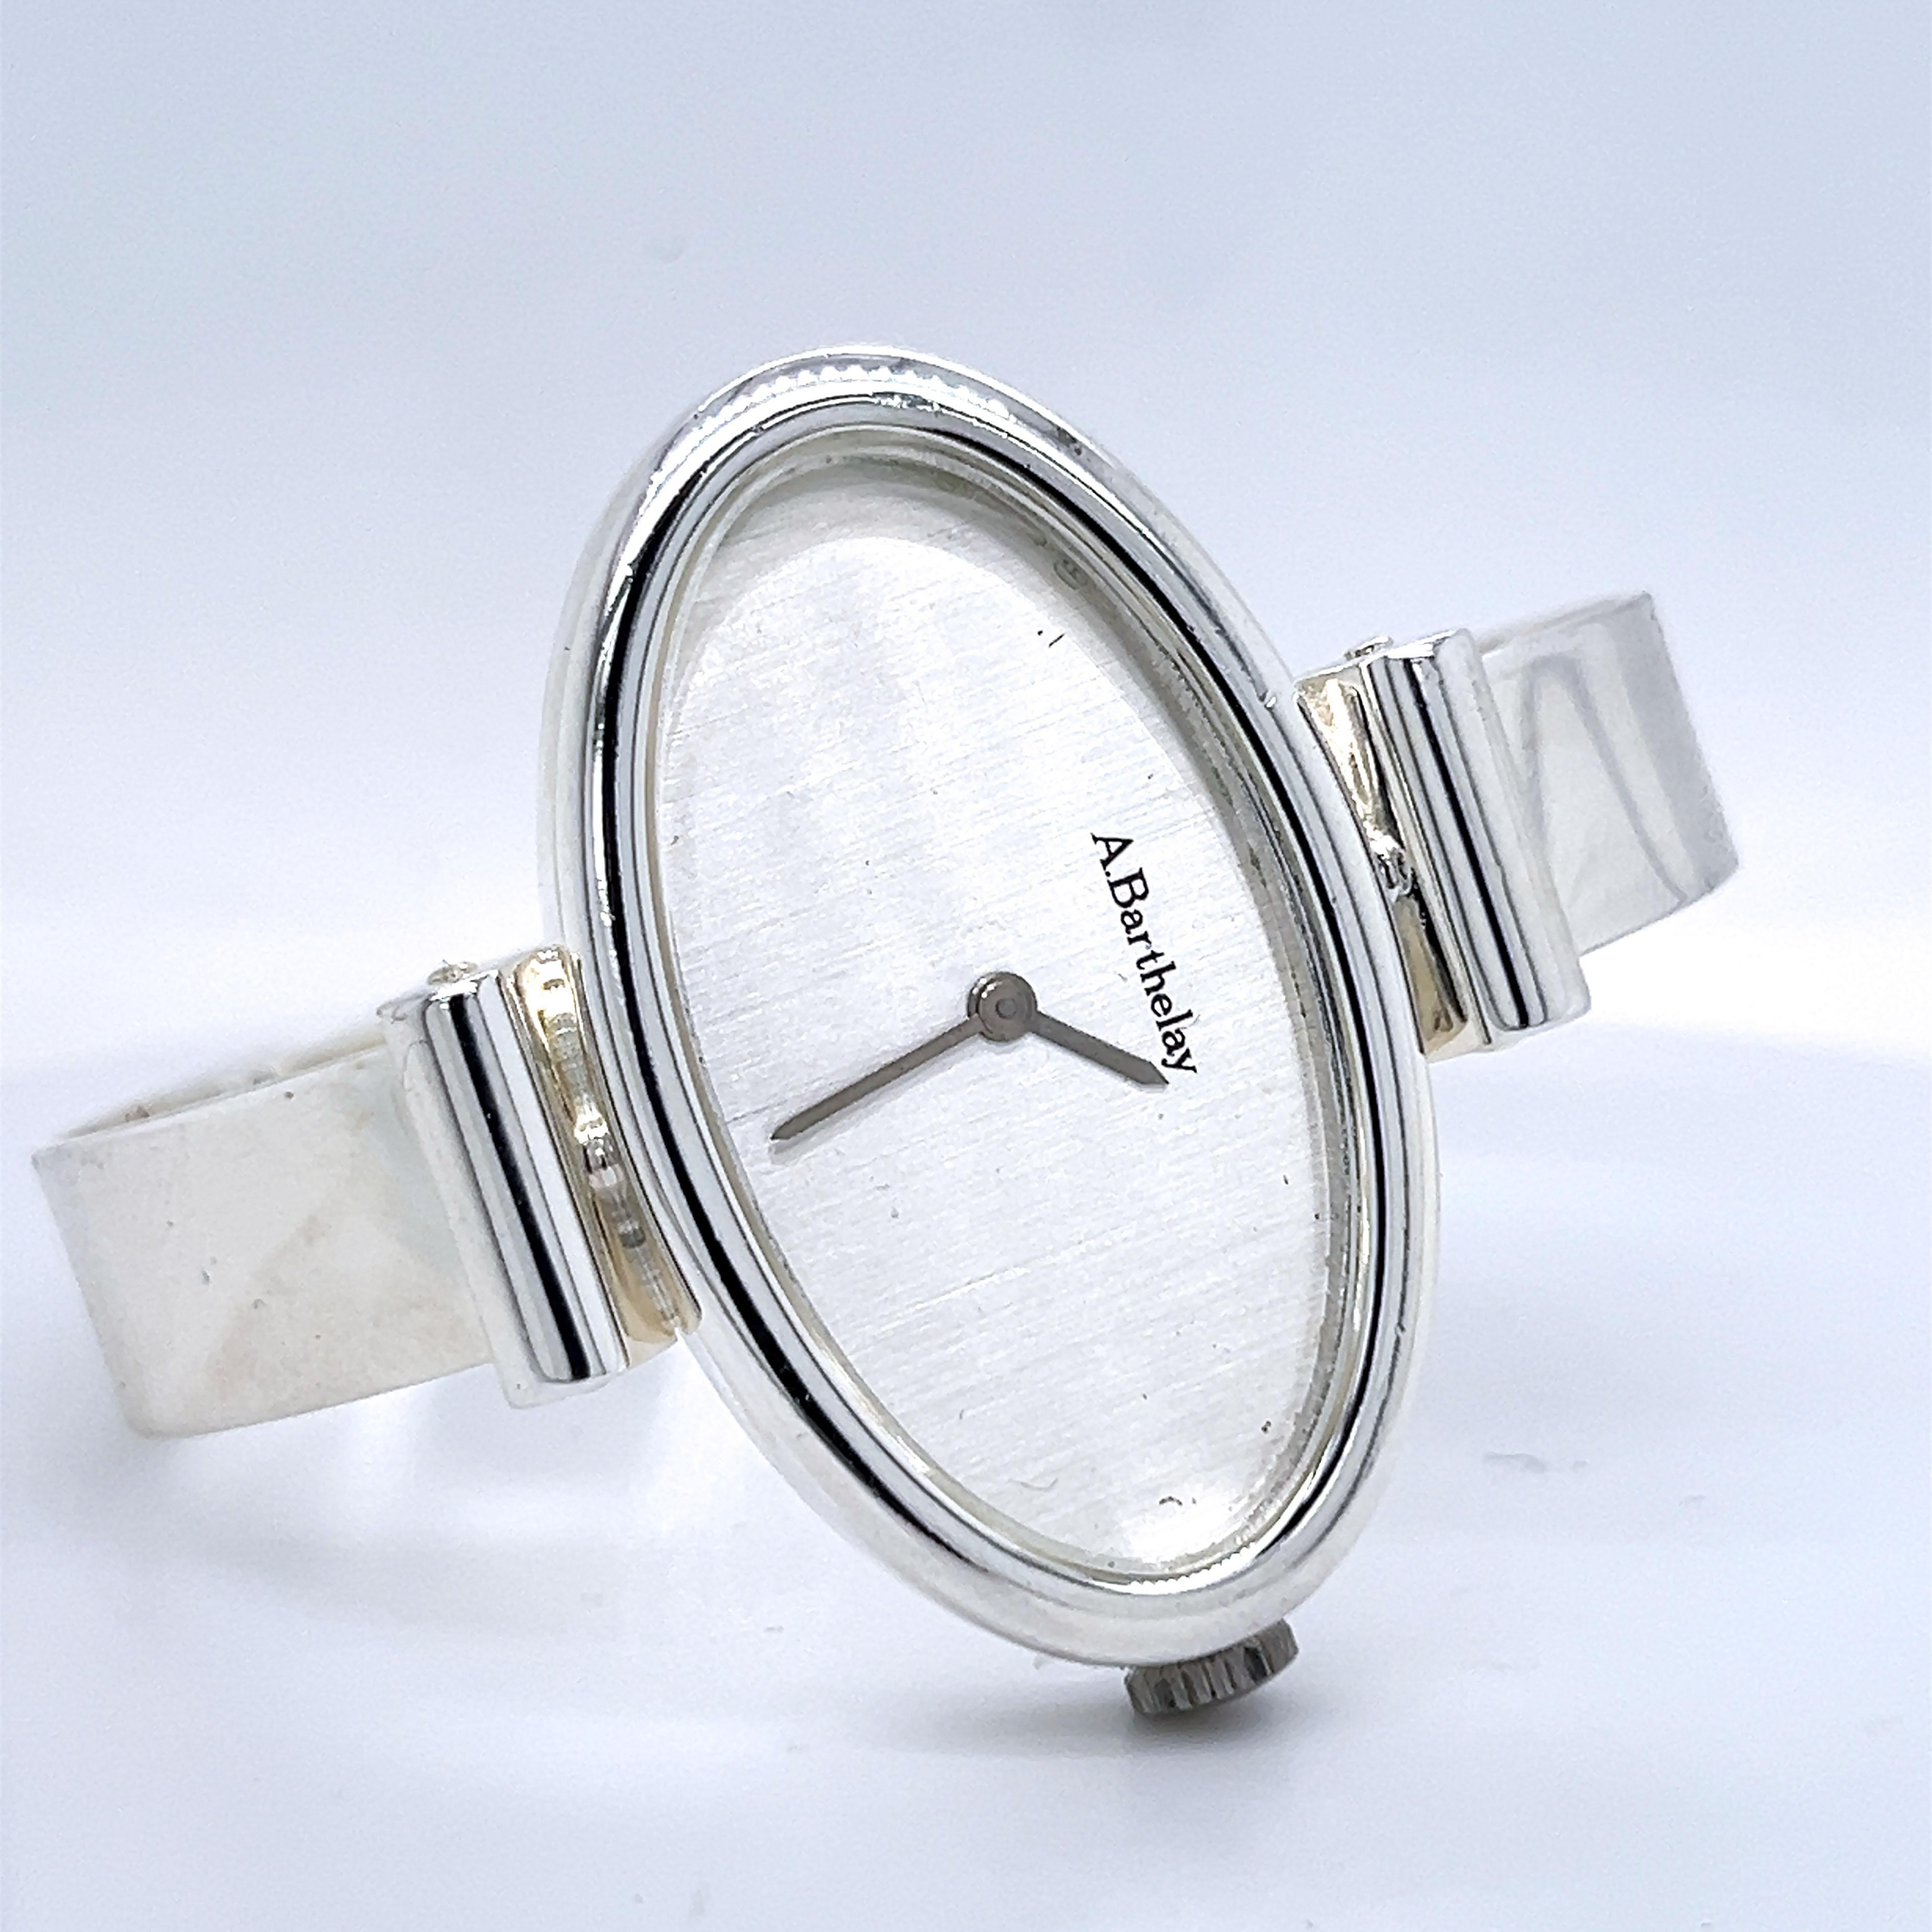 1972 Alexis Barthelay Hand-Wound Movement Elliptical Sterling Silver Watch In Excellent Condition For Sale In Valenza, IT